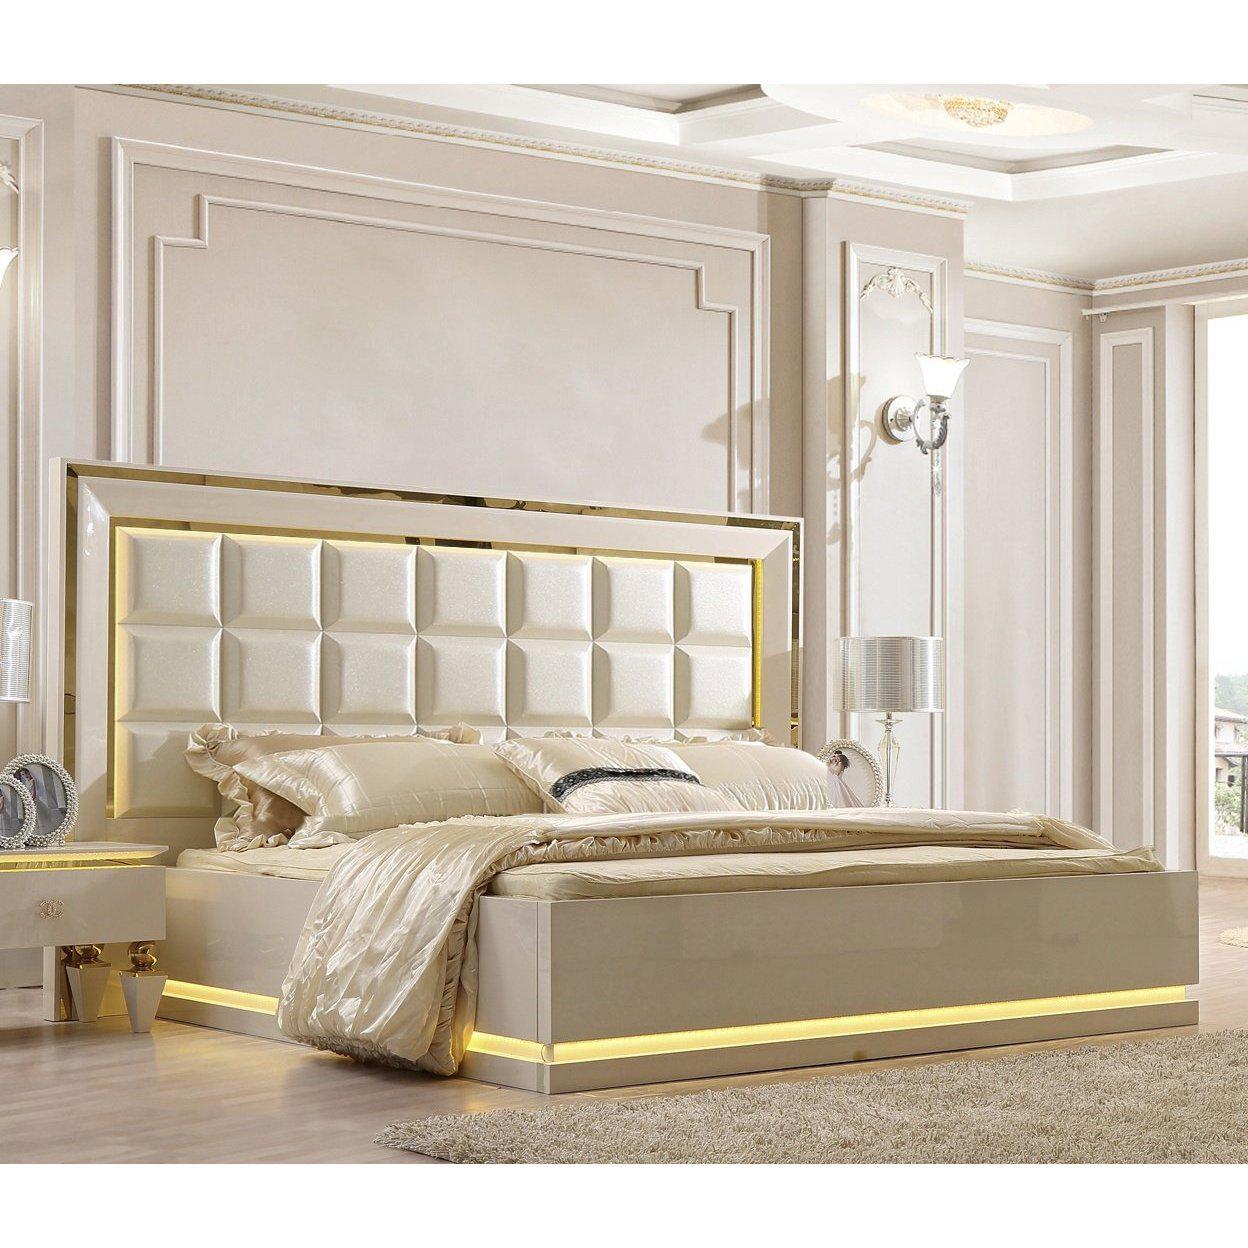 Homey Design Luxury Hd-9935 - Bed(Ck:74*86)-Iron Home Concepts